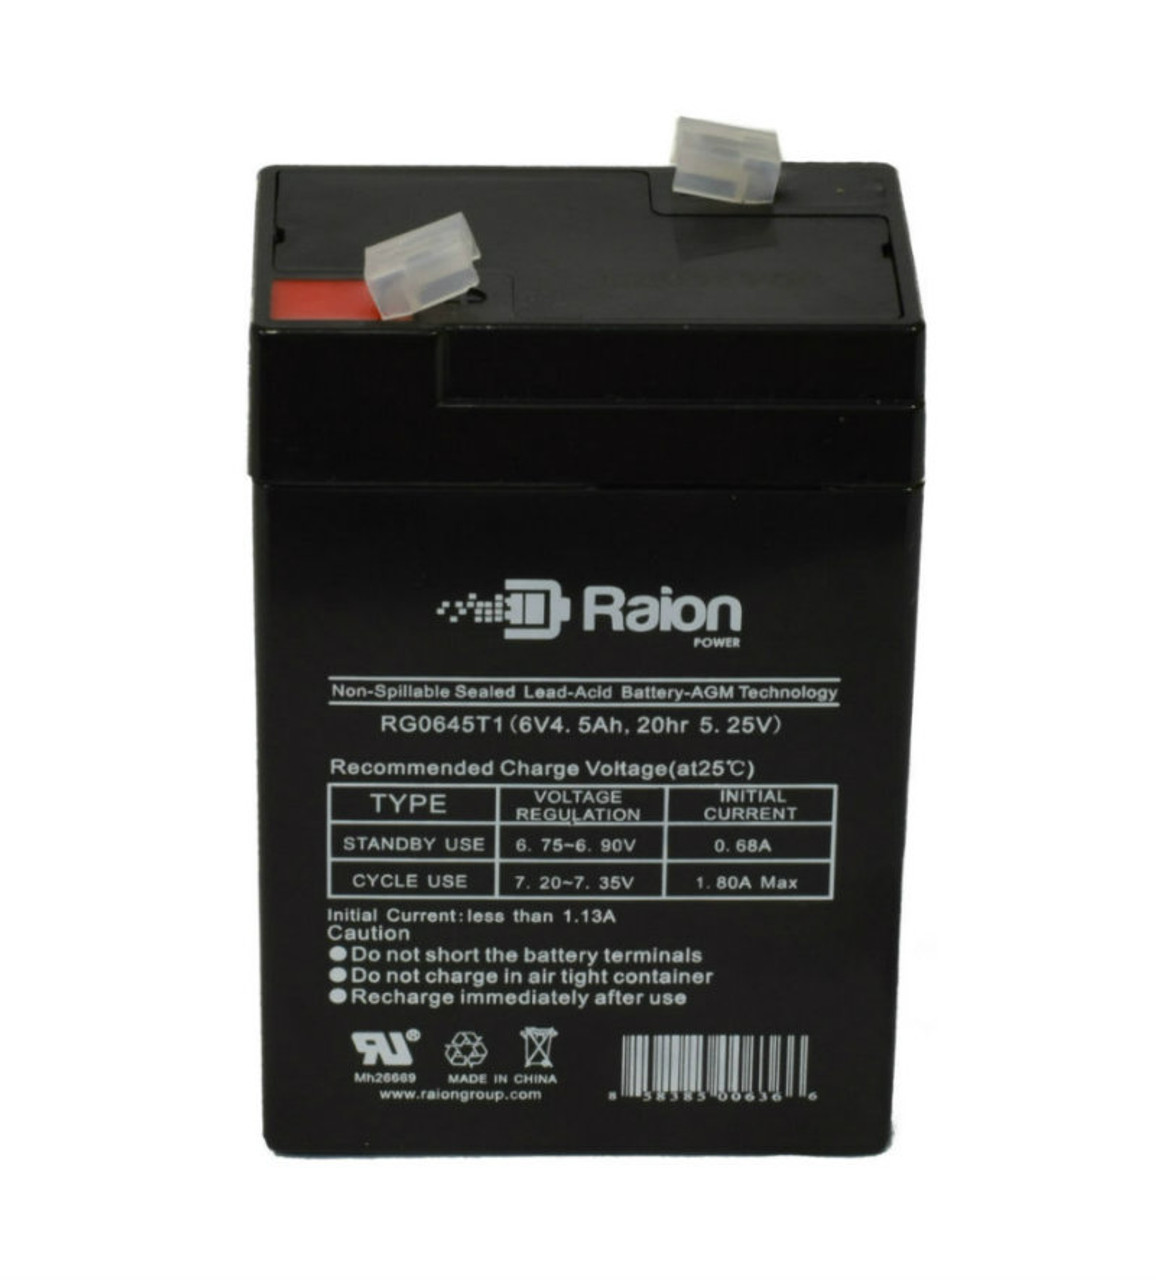 Raion Power RG0645T1 Replacement Battery Cartridge for High-Lites 39-21